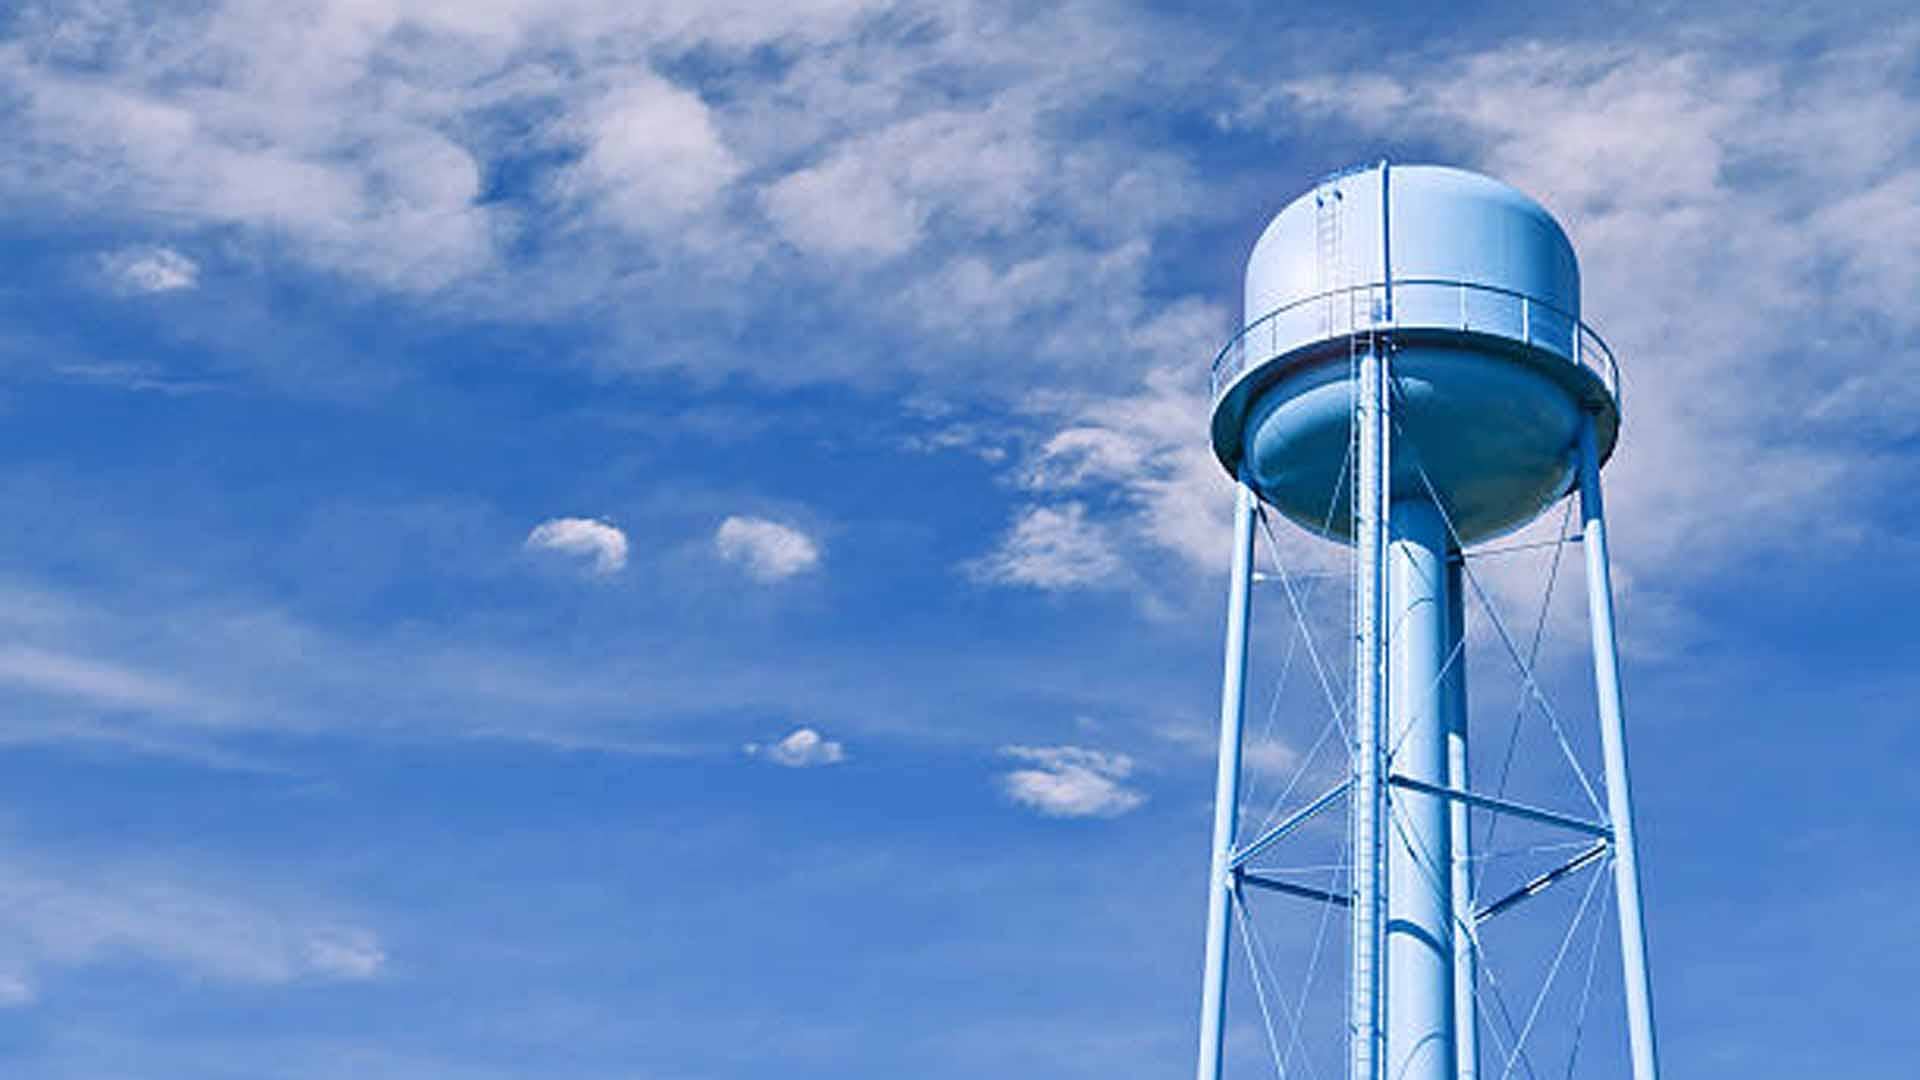 A city water tower set against a blue sky